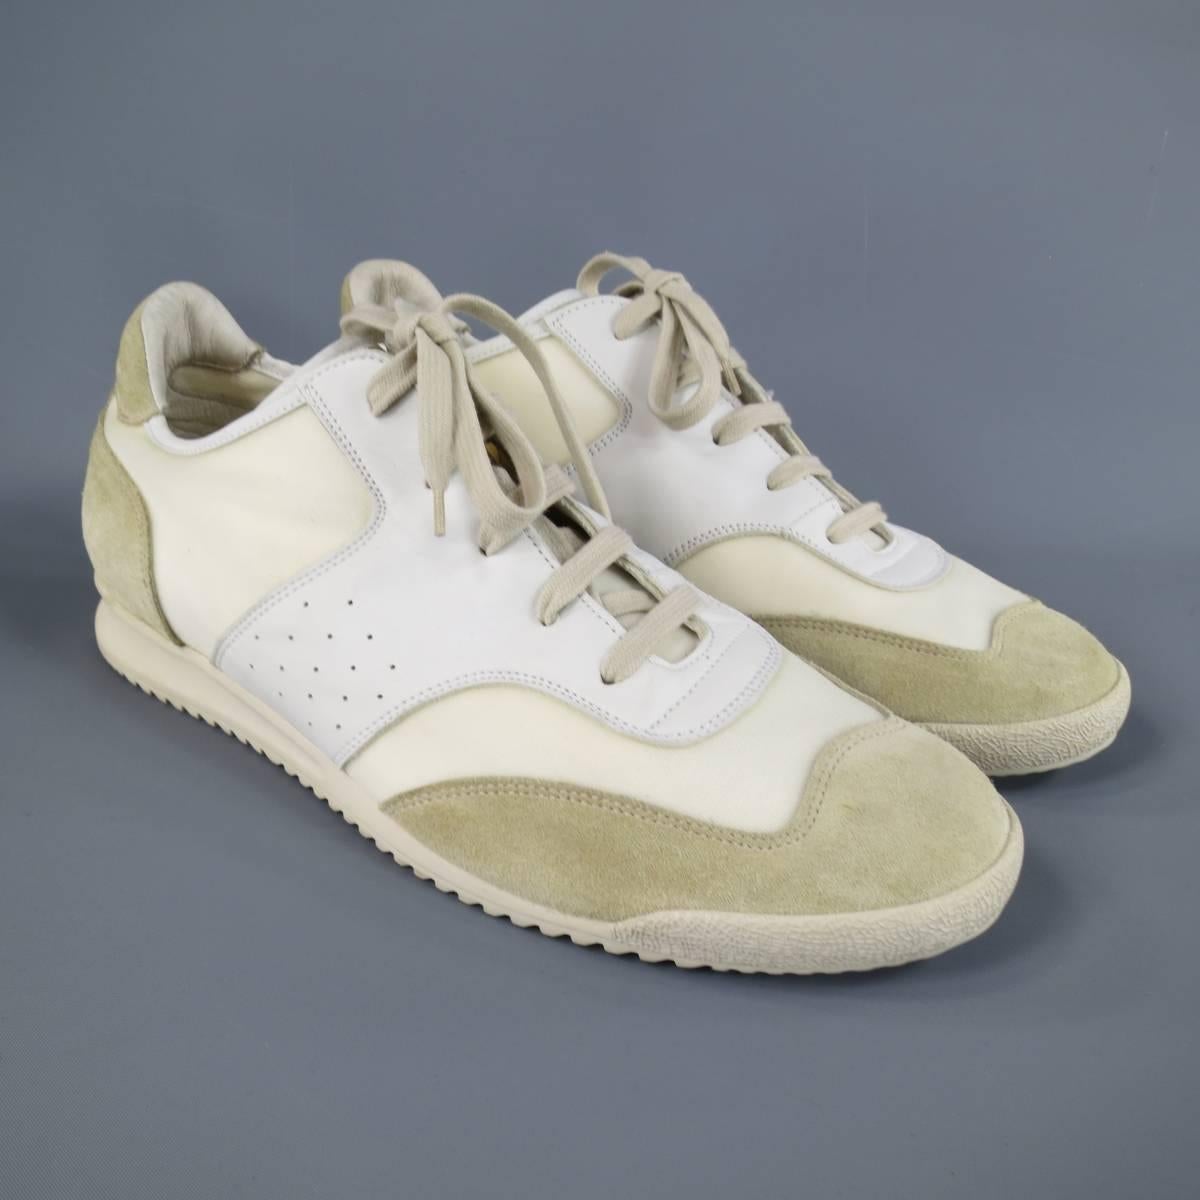 MAISON MARTIN MARGIELA Size 13 Off White Cream Leather & Suede Trainer Sneakers 1